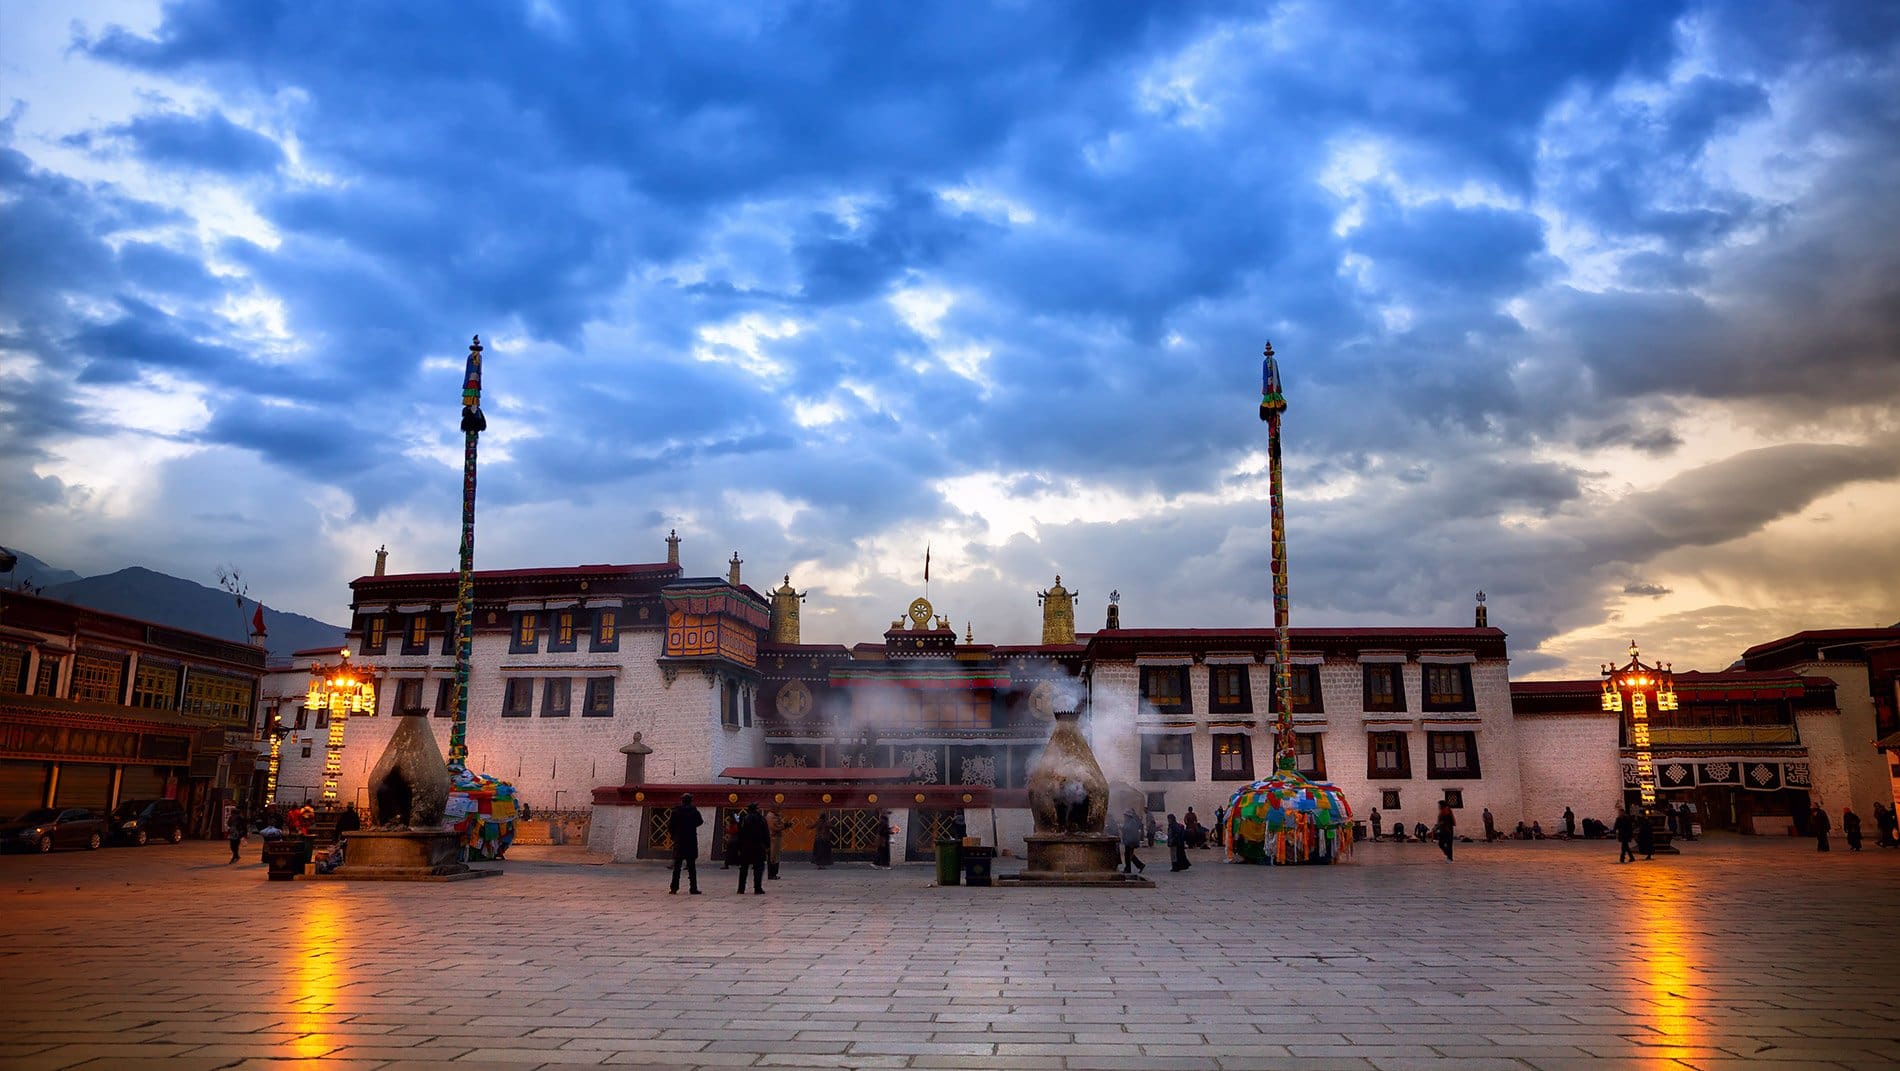 Jokhang Temple~The Jowo statue, Tibetan Buddhism's holiest, is housed in the innermost chapel of the seventh century Jokhang Temple, at the heart of Lhasa.